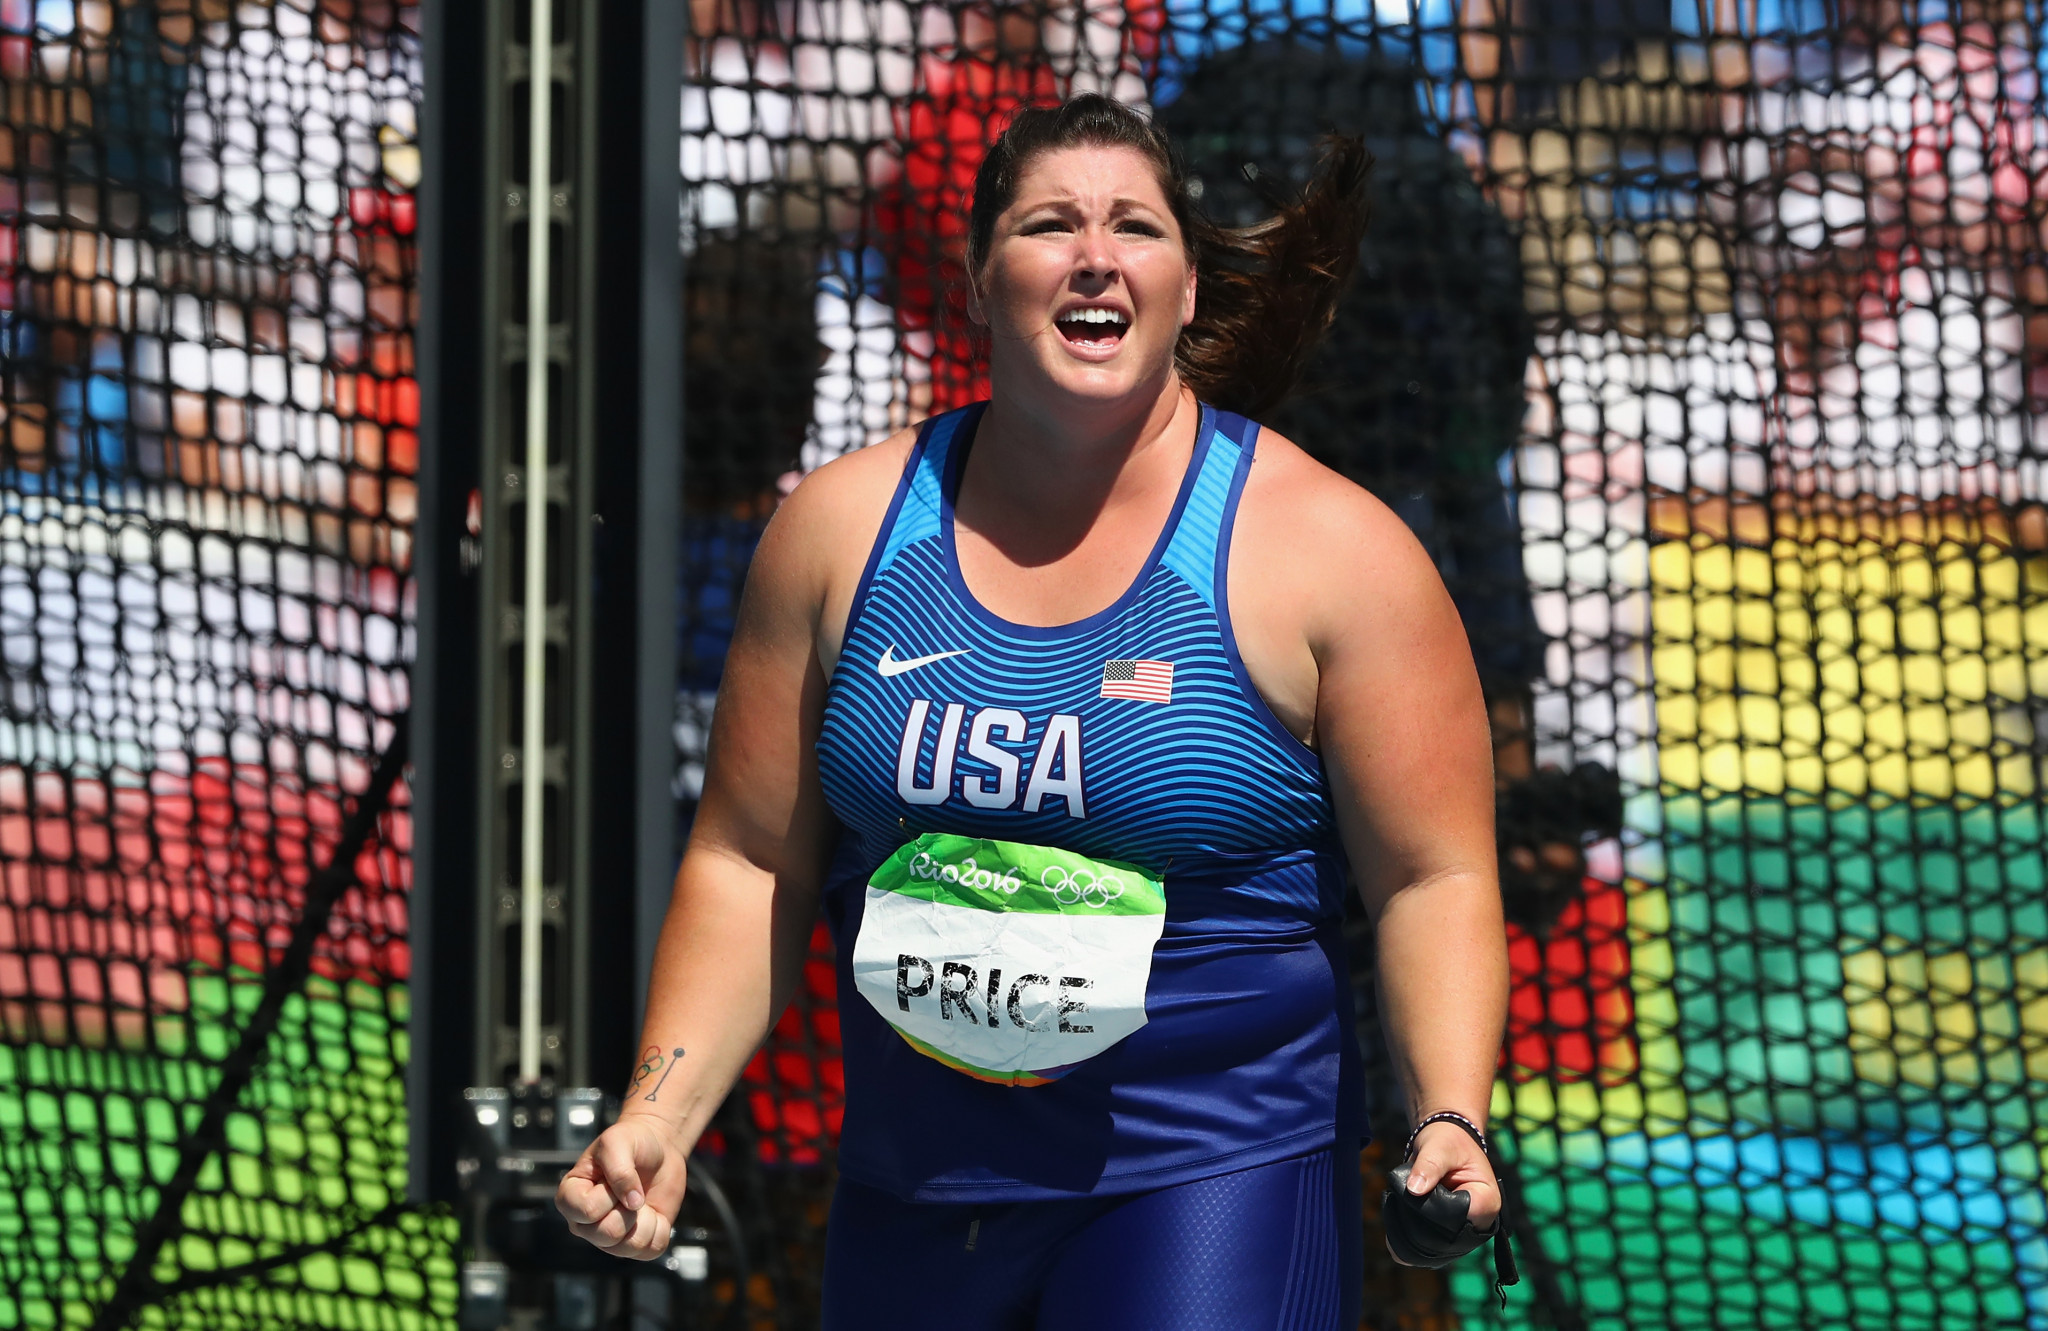 The women's hammer throw was among gold medal events held in the morning at Rio 2016 ©Getty Images